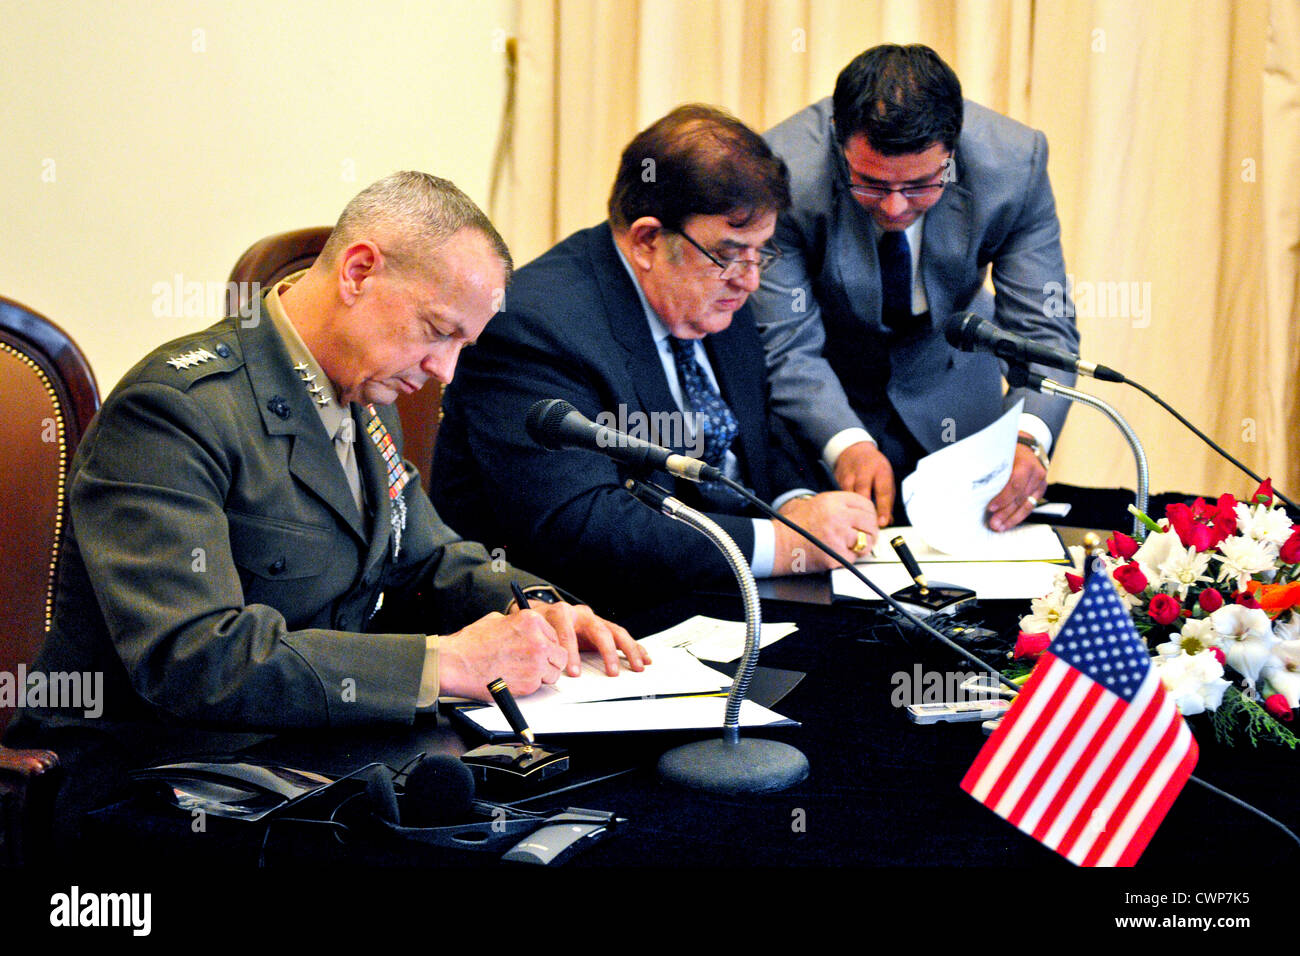 Commander of US Forces in Afghanistan Gen. John R. Allen and Afghan Minister of Defense Abdul Rahim Wardak sign an agreement on the process that enables Afghan National Security Forces to take the lead on special operations April 8, 2012 in Kabul, Afghanistan. Stock Photo